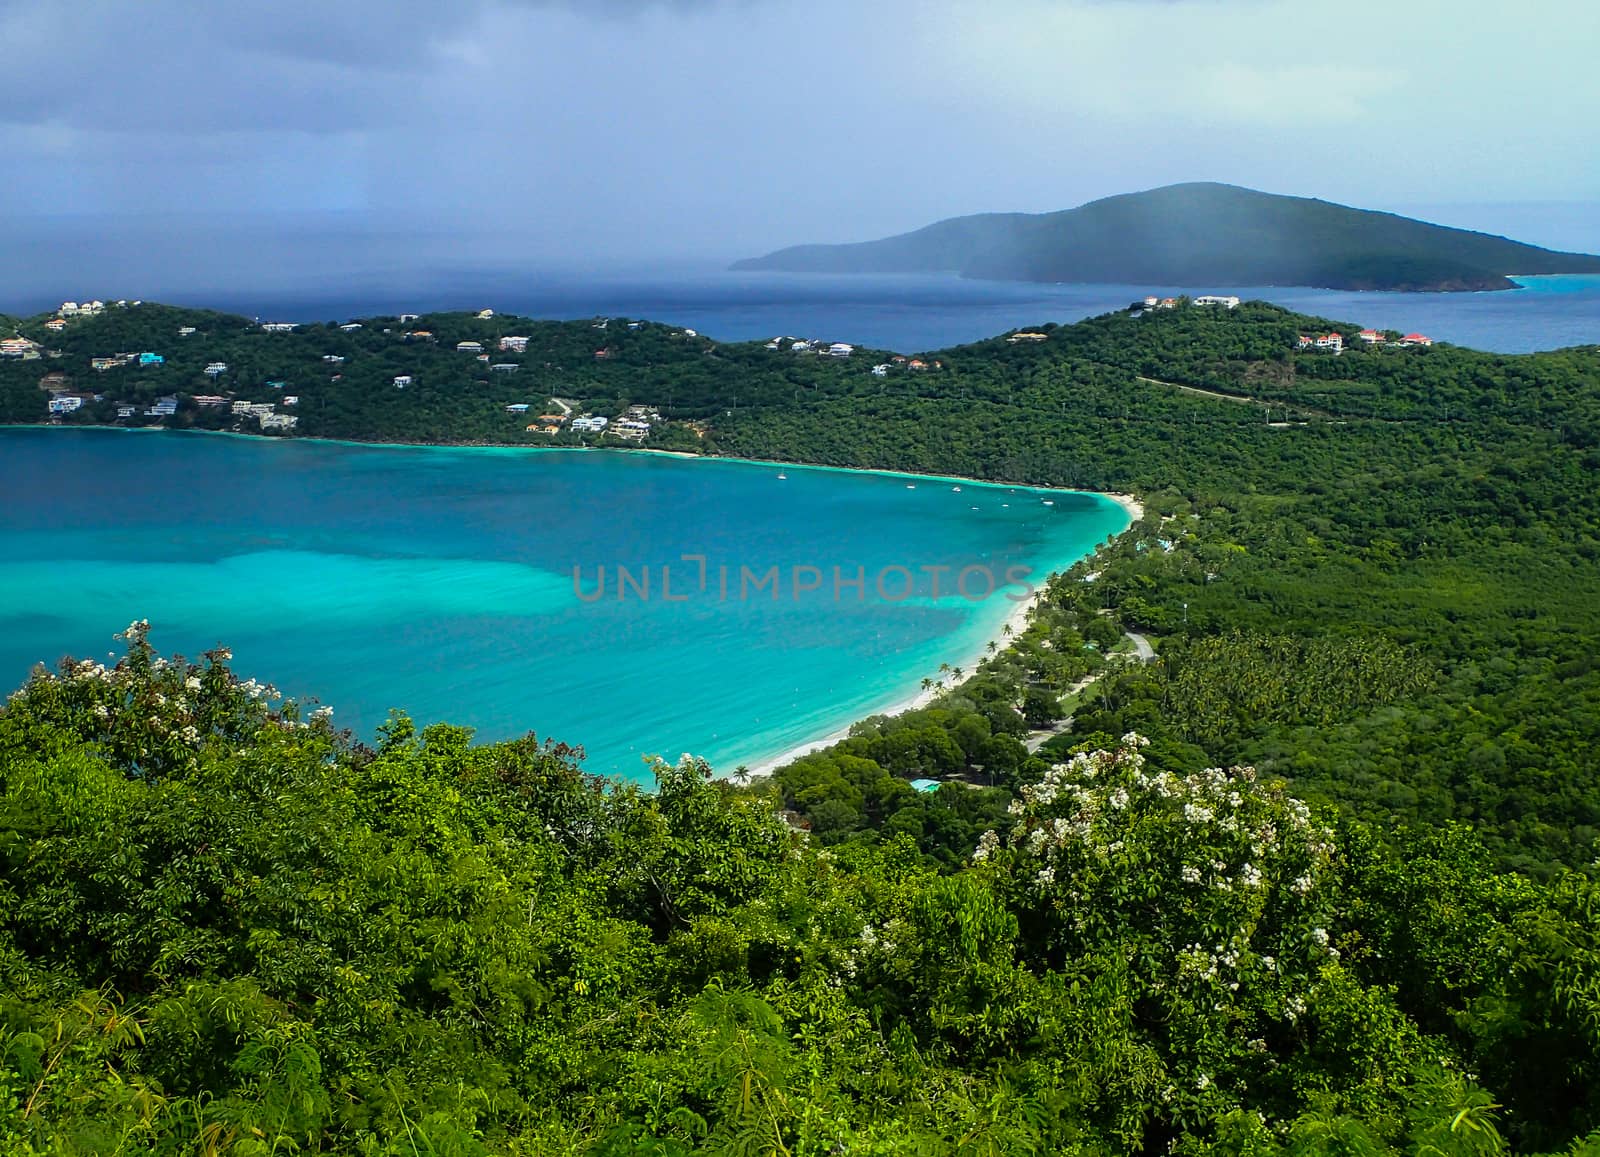 Magens Beach in St. Thomas US Virgin Island on a beautiful clear day with turquoise blue water